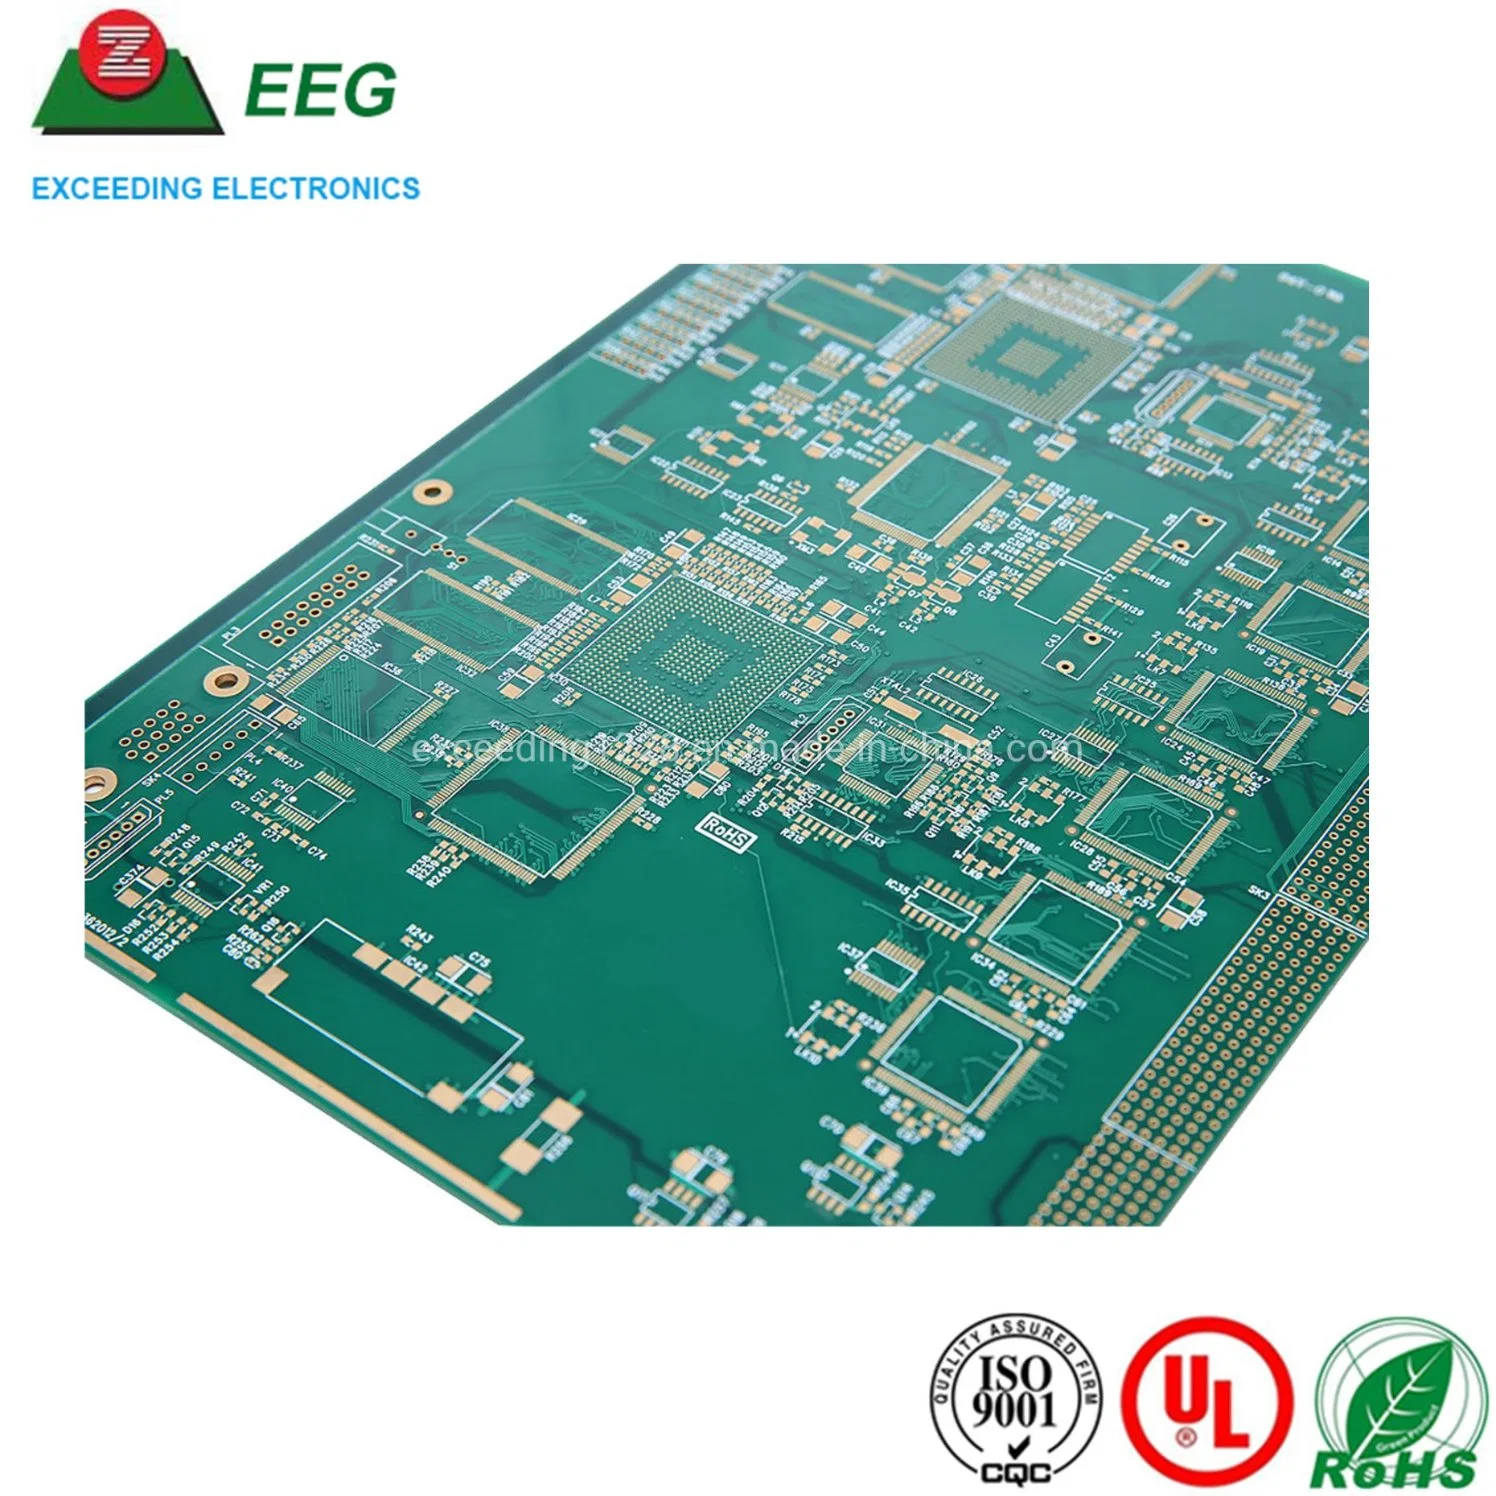 Prototyping Printed Circuit Board Multilayer PCB Manufacturing with UL, ISO9001